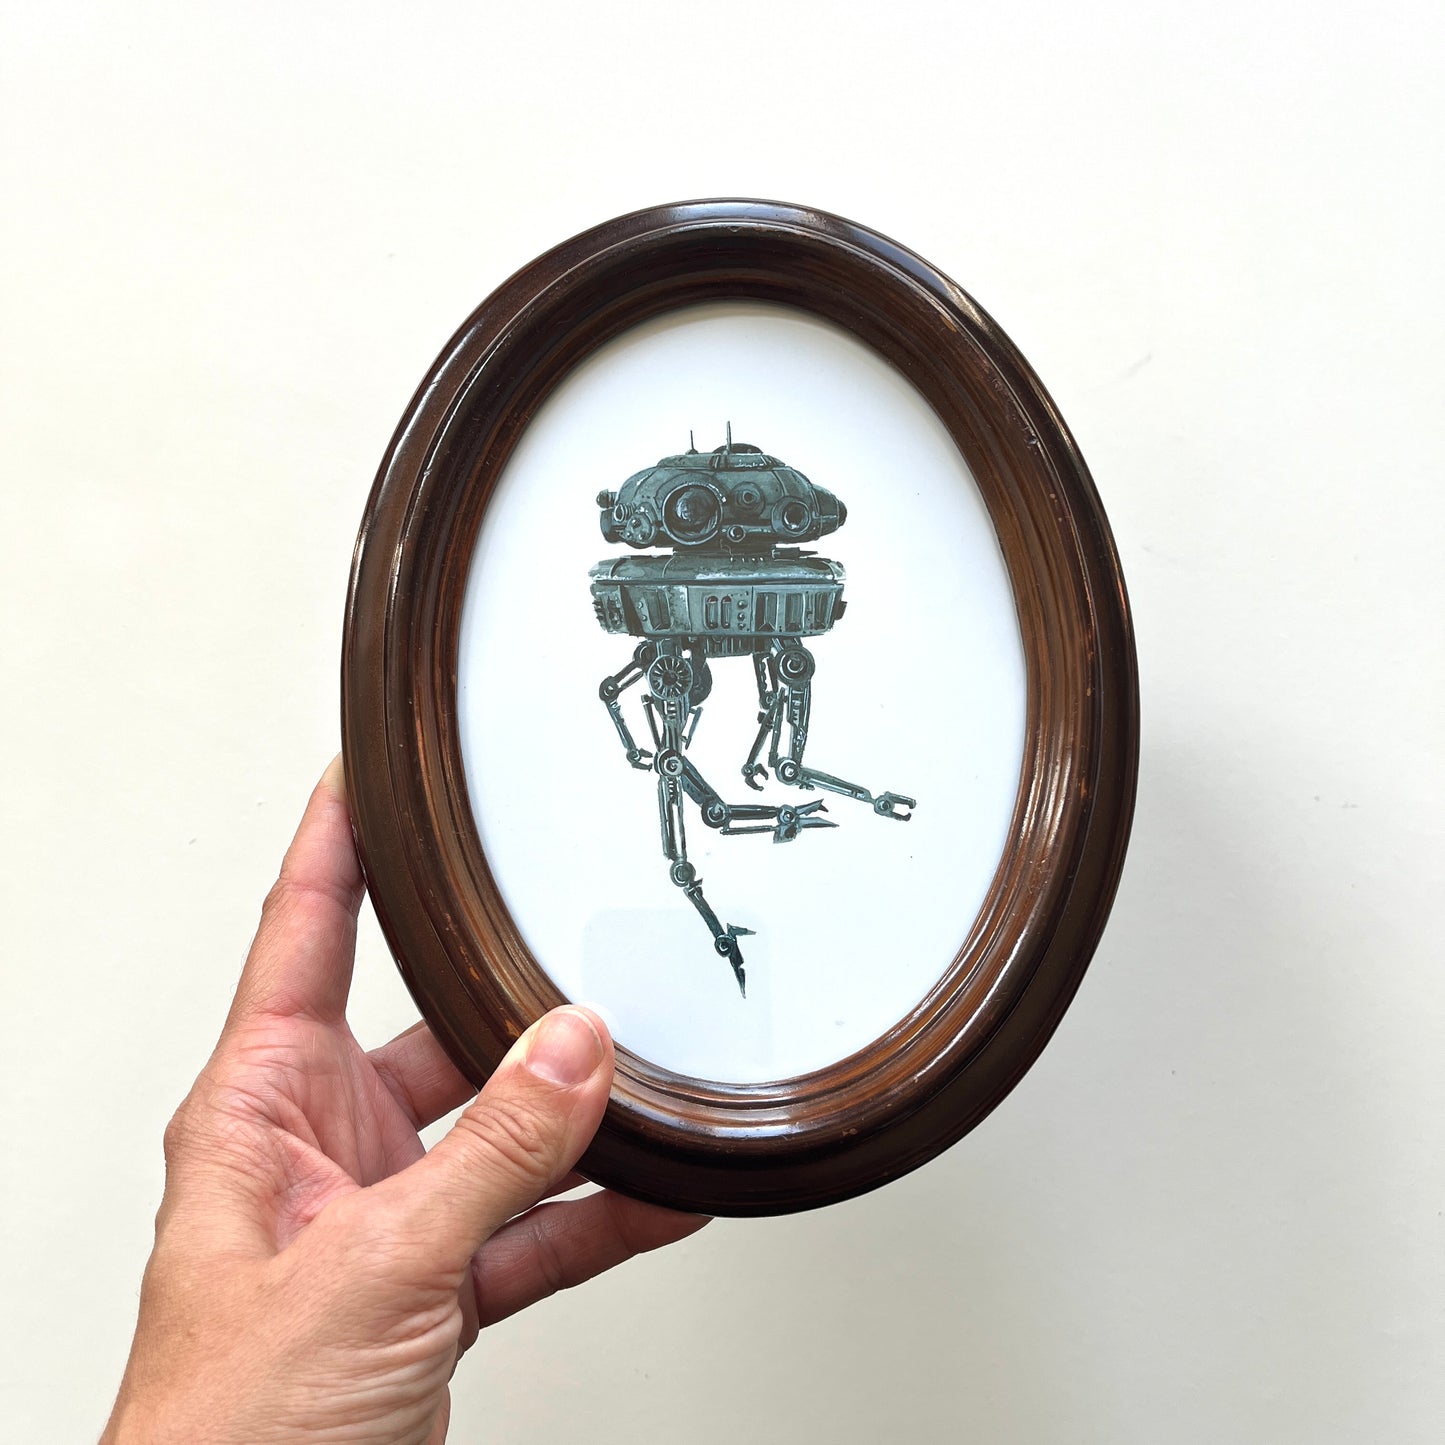 Portrait of A Probe Droid - PRINT in Reclaimed Frame